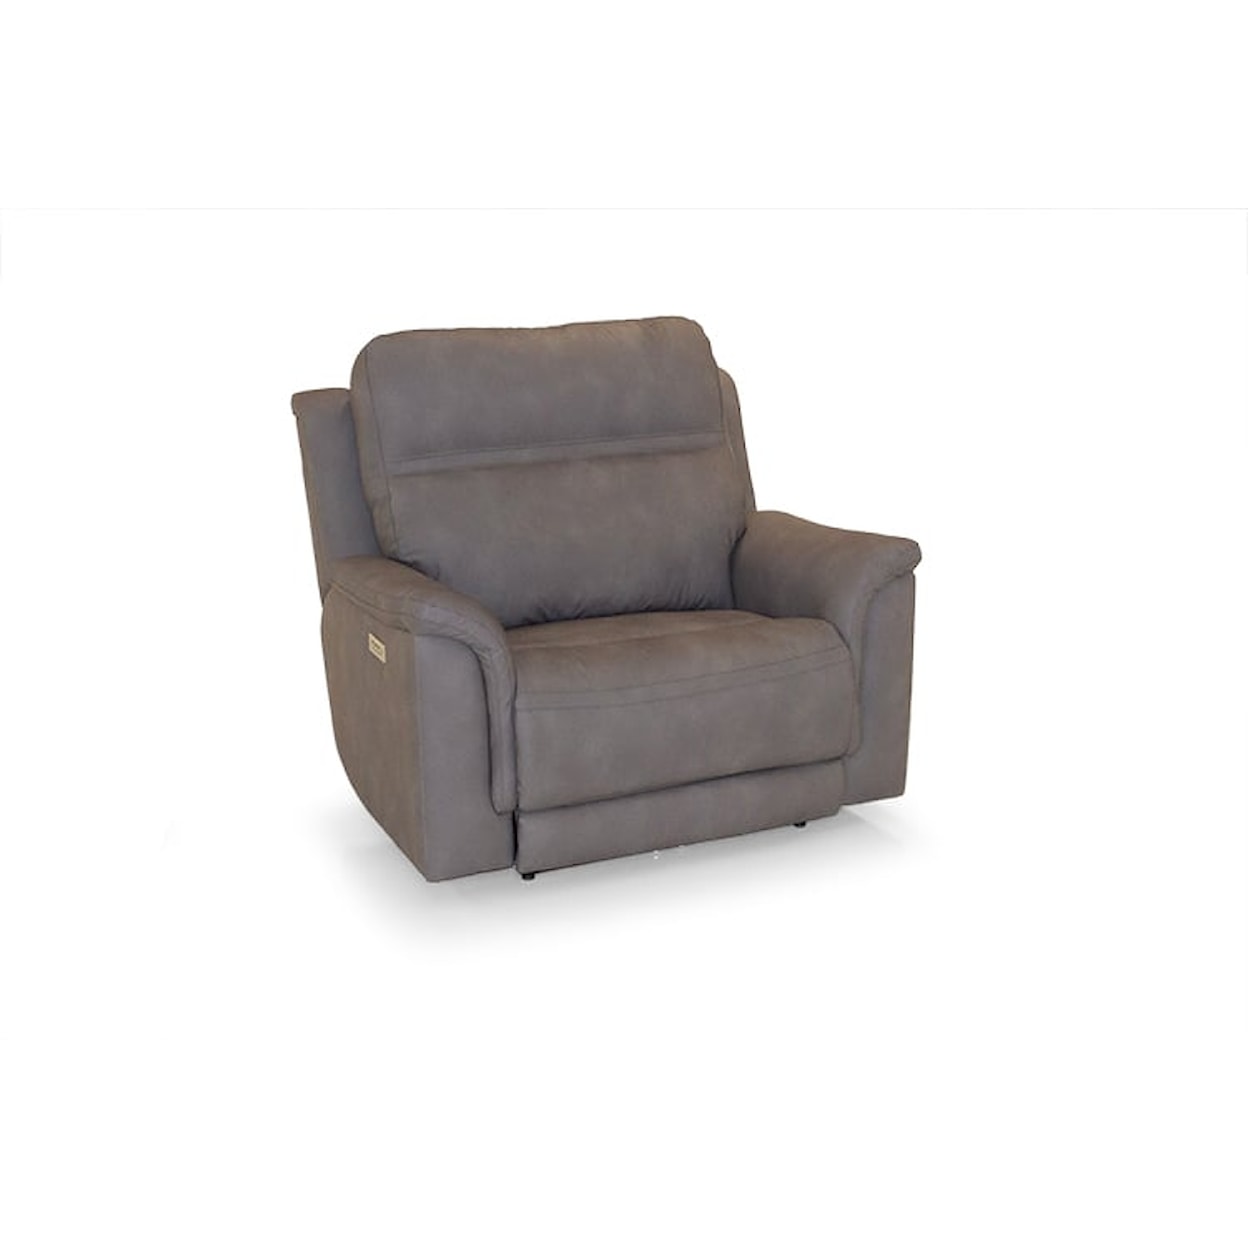 Stanton 887 Power Reclining Chair with Power Headrest